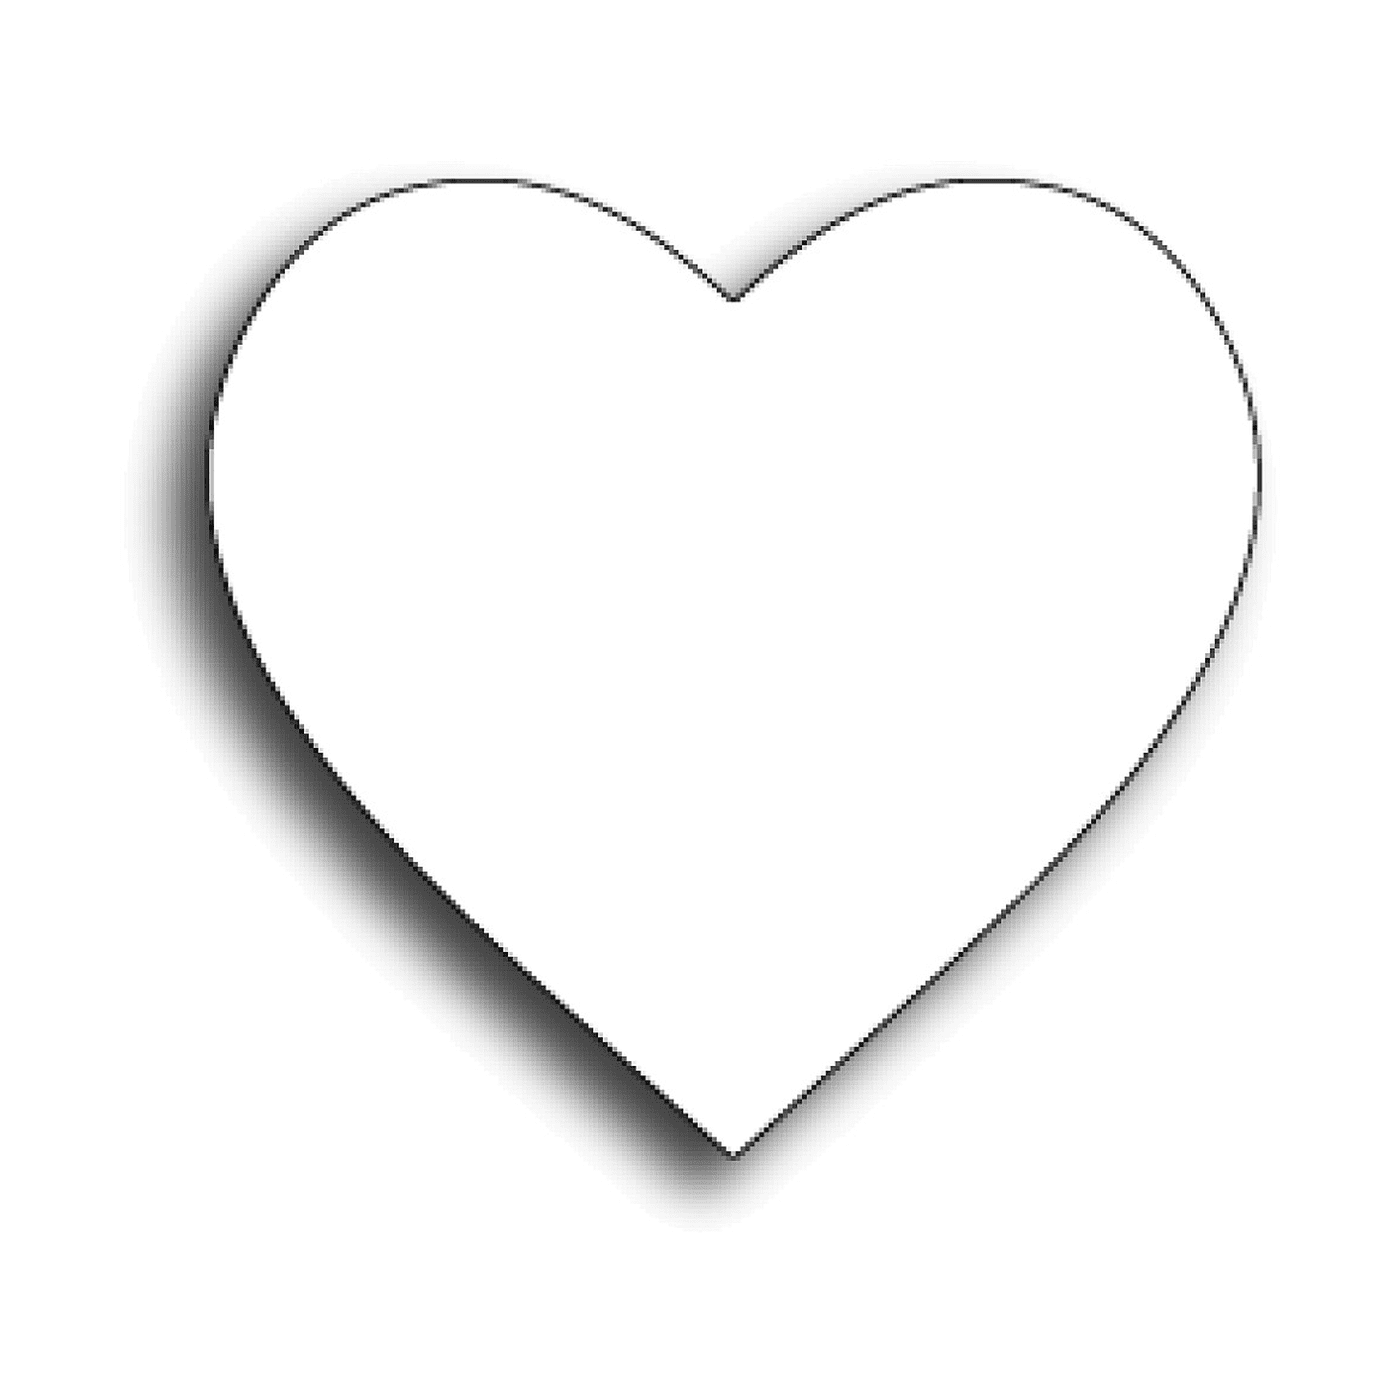  Pure white heart without background 